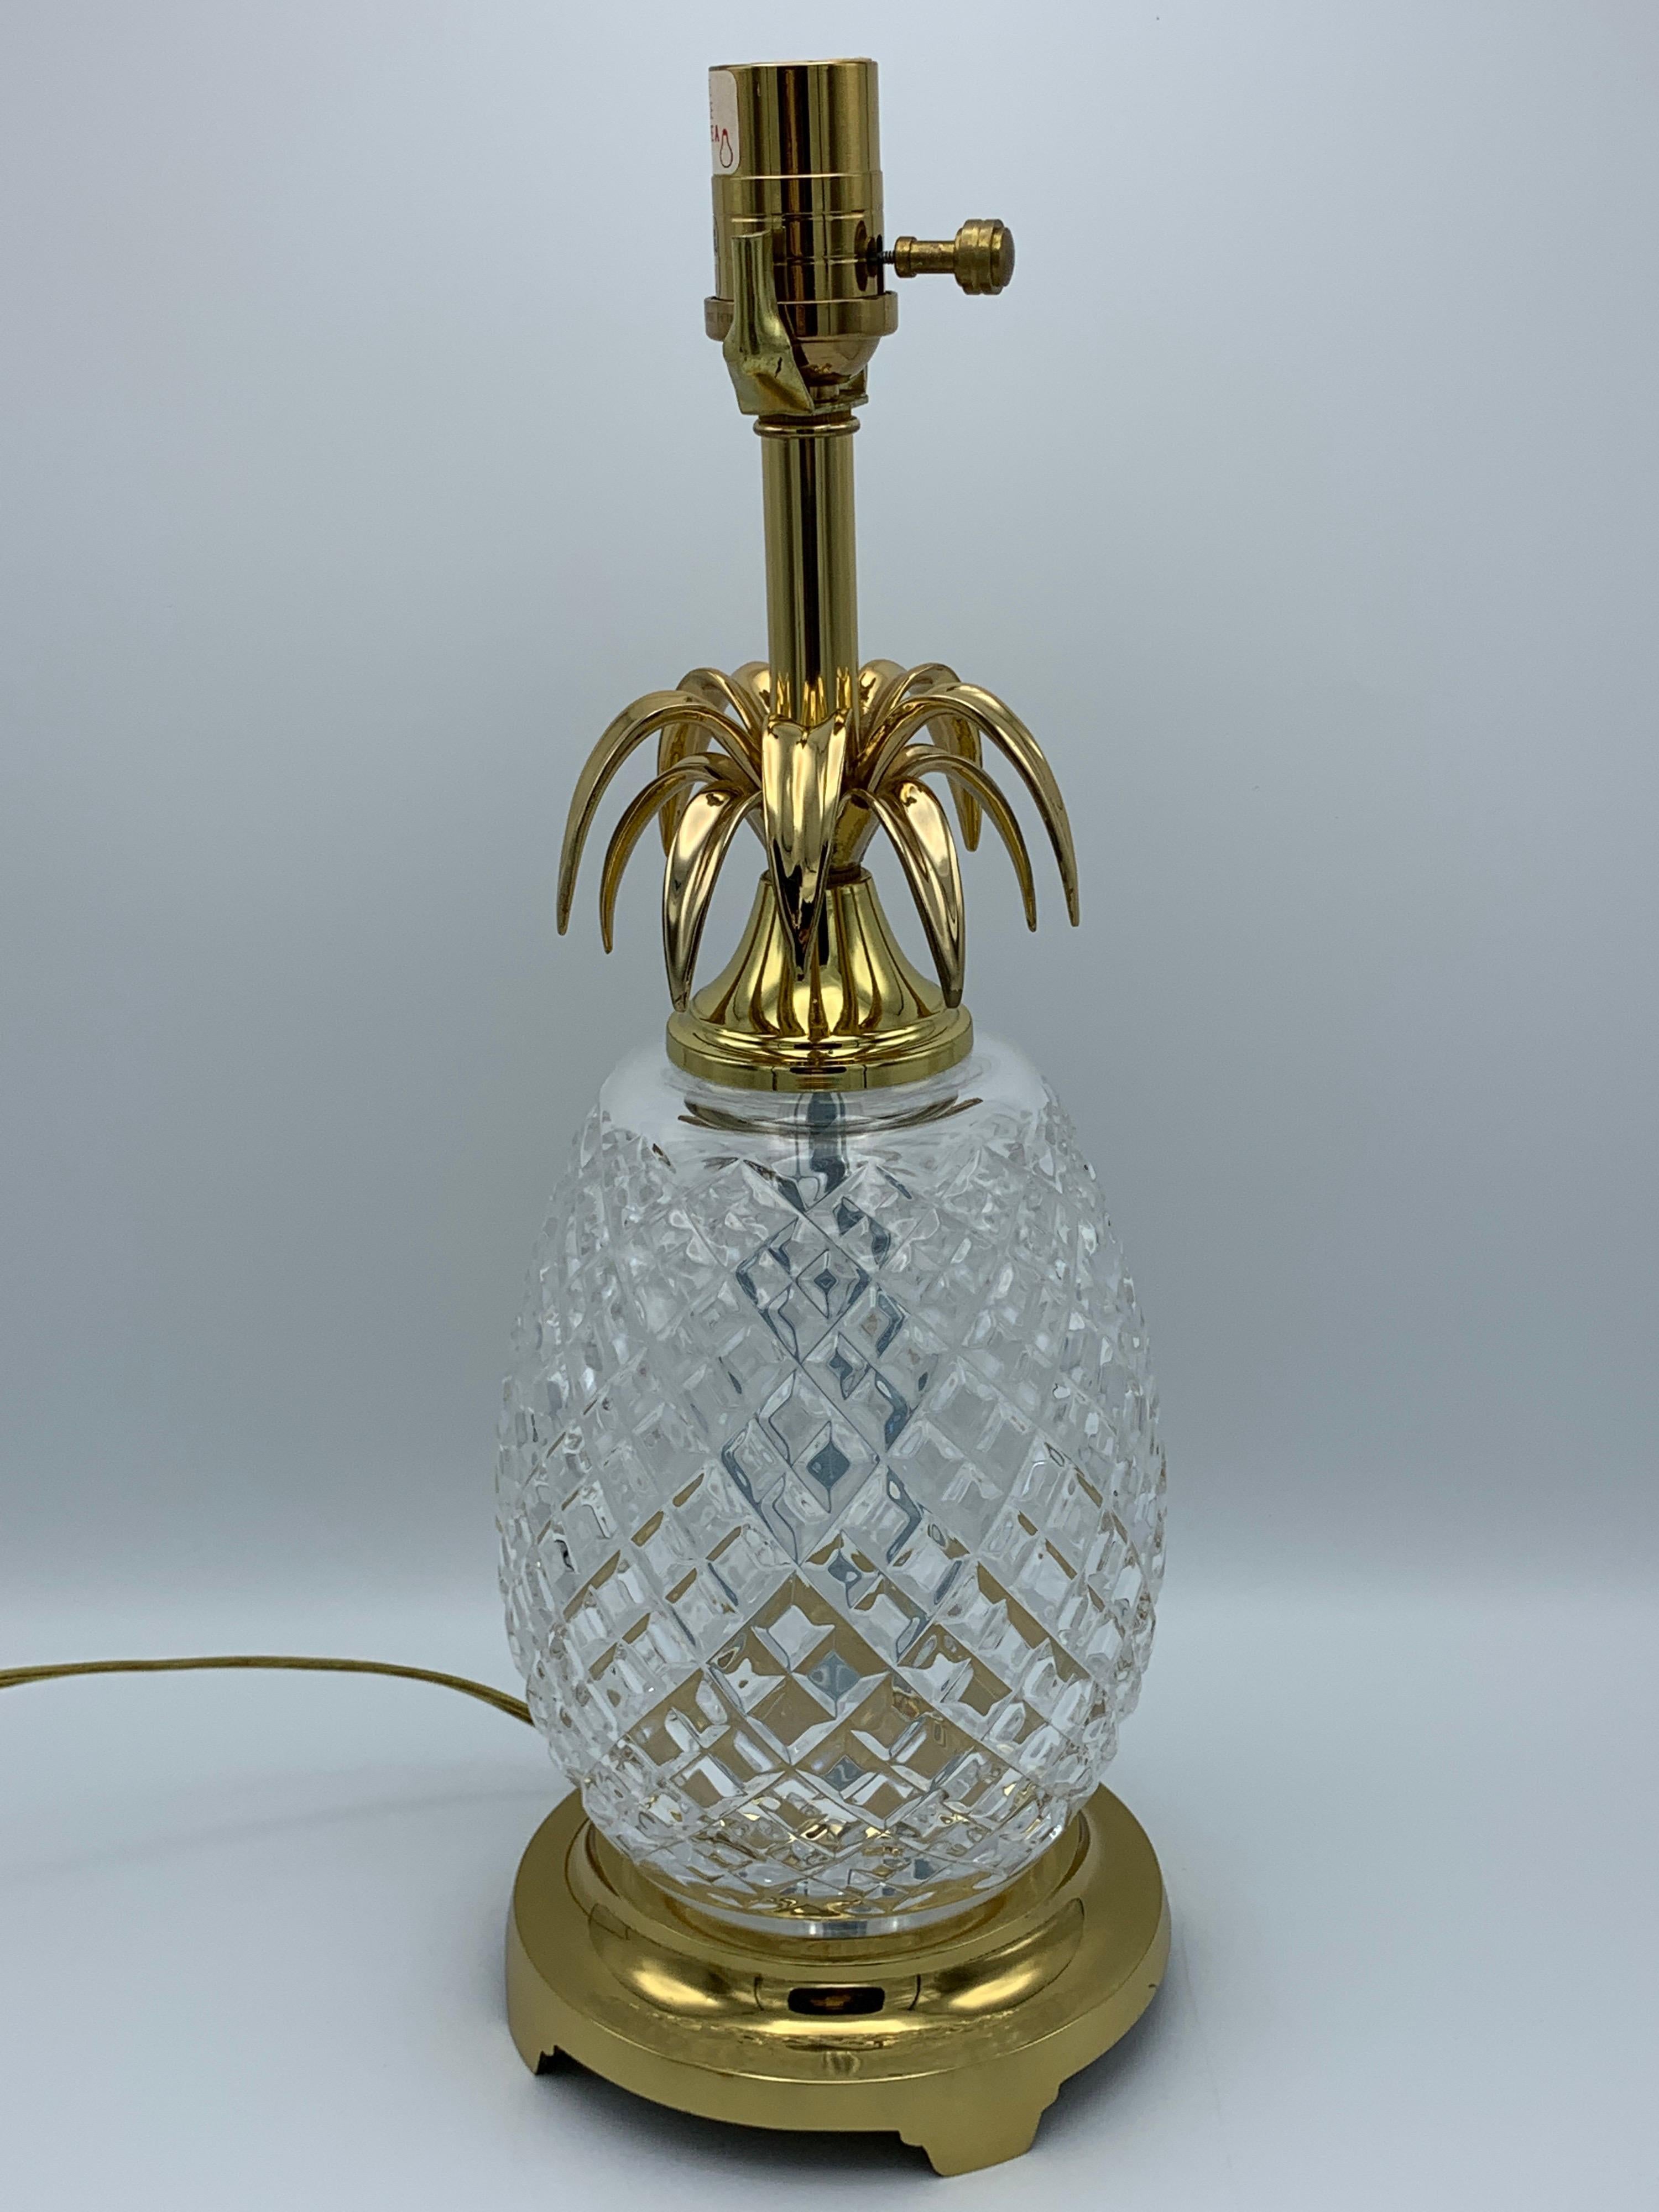 American Classical 1980s Waterford Crystal and Brass Pineapple Lamp